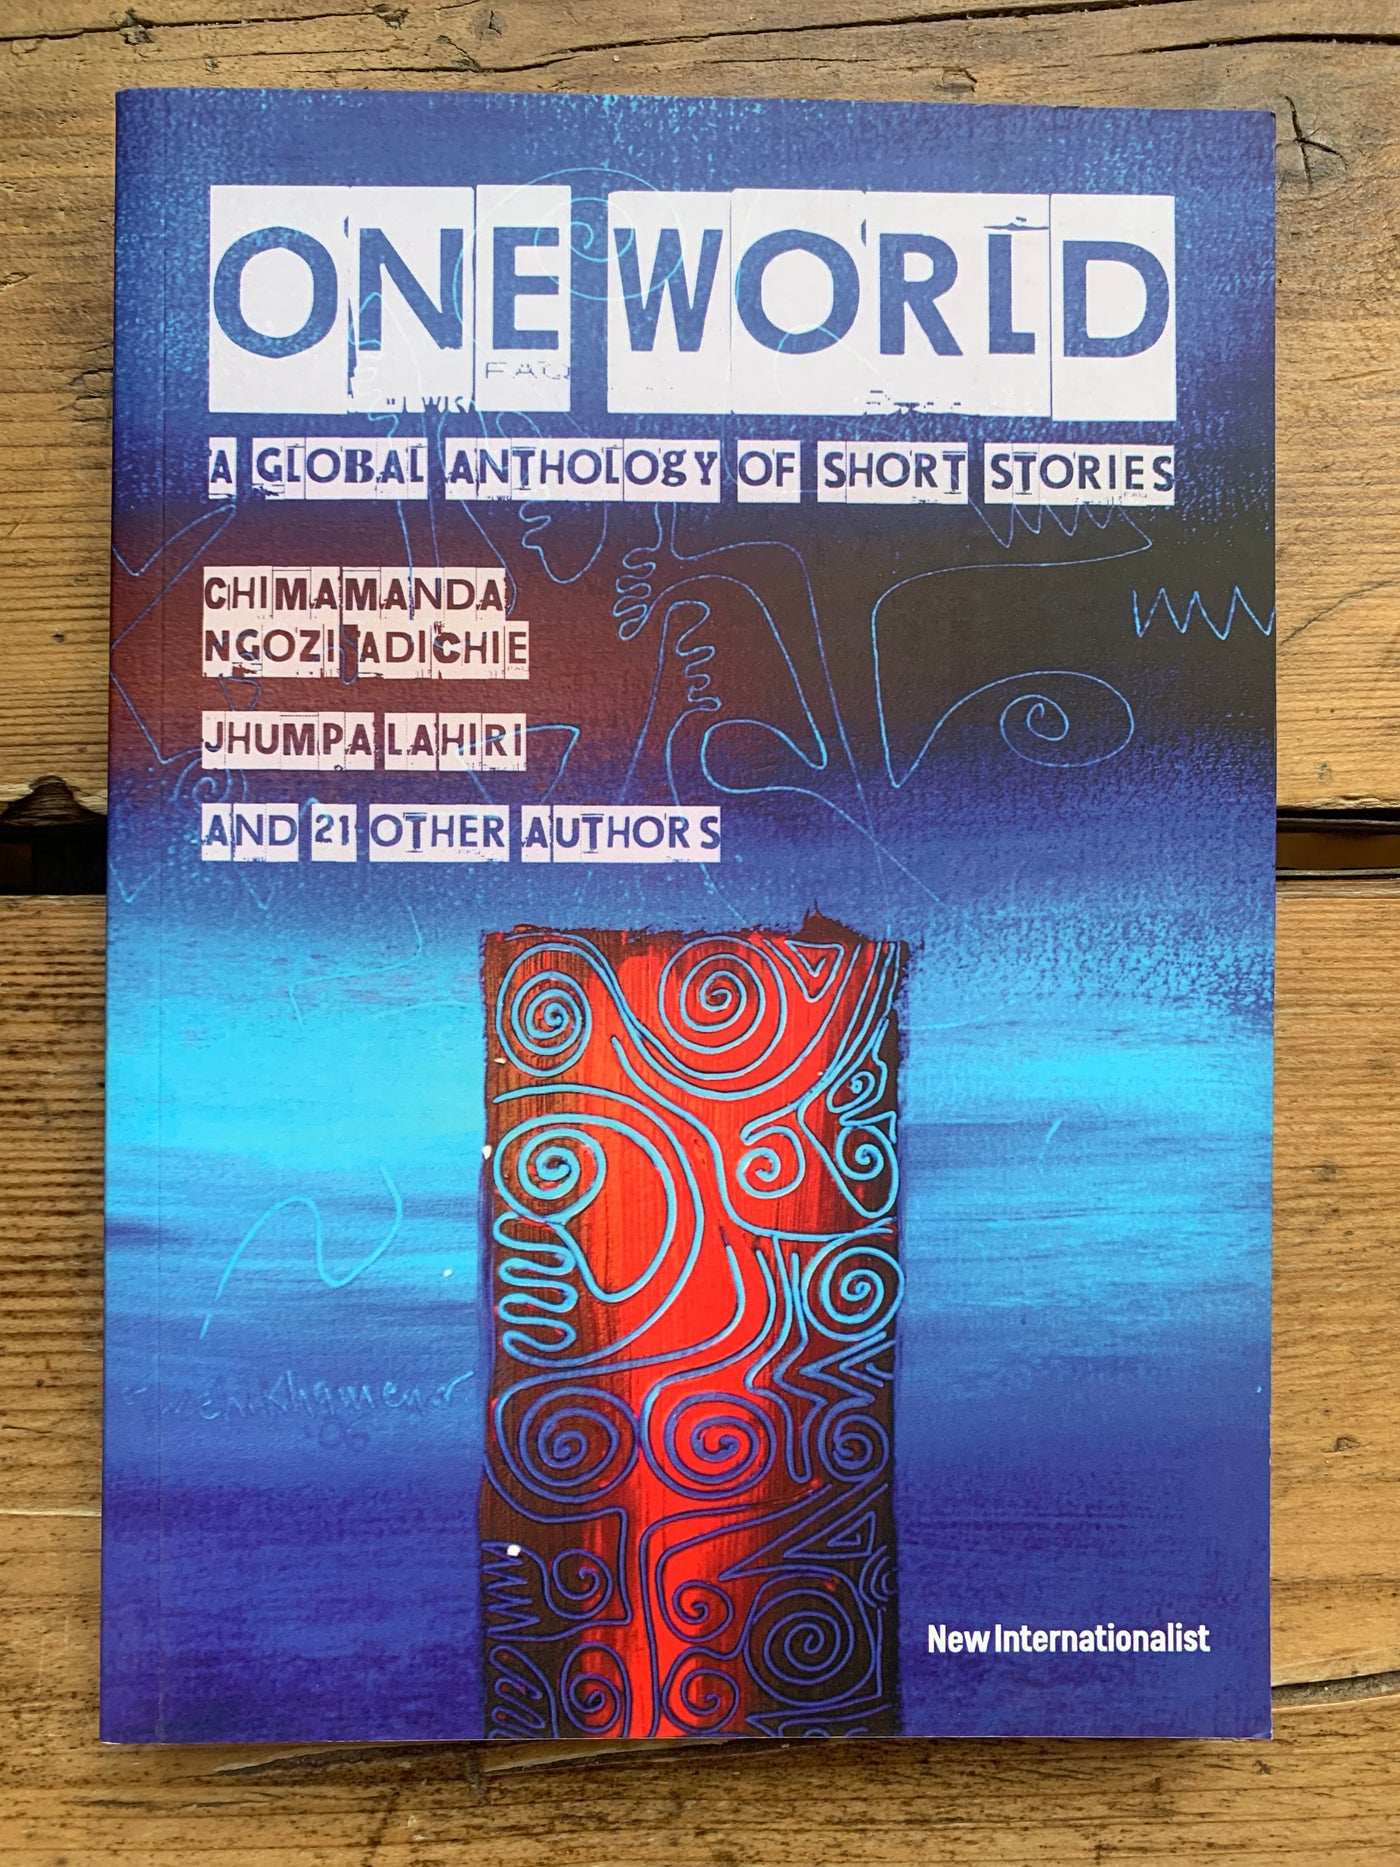 One World : A global anthology of short stories